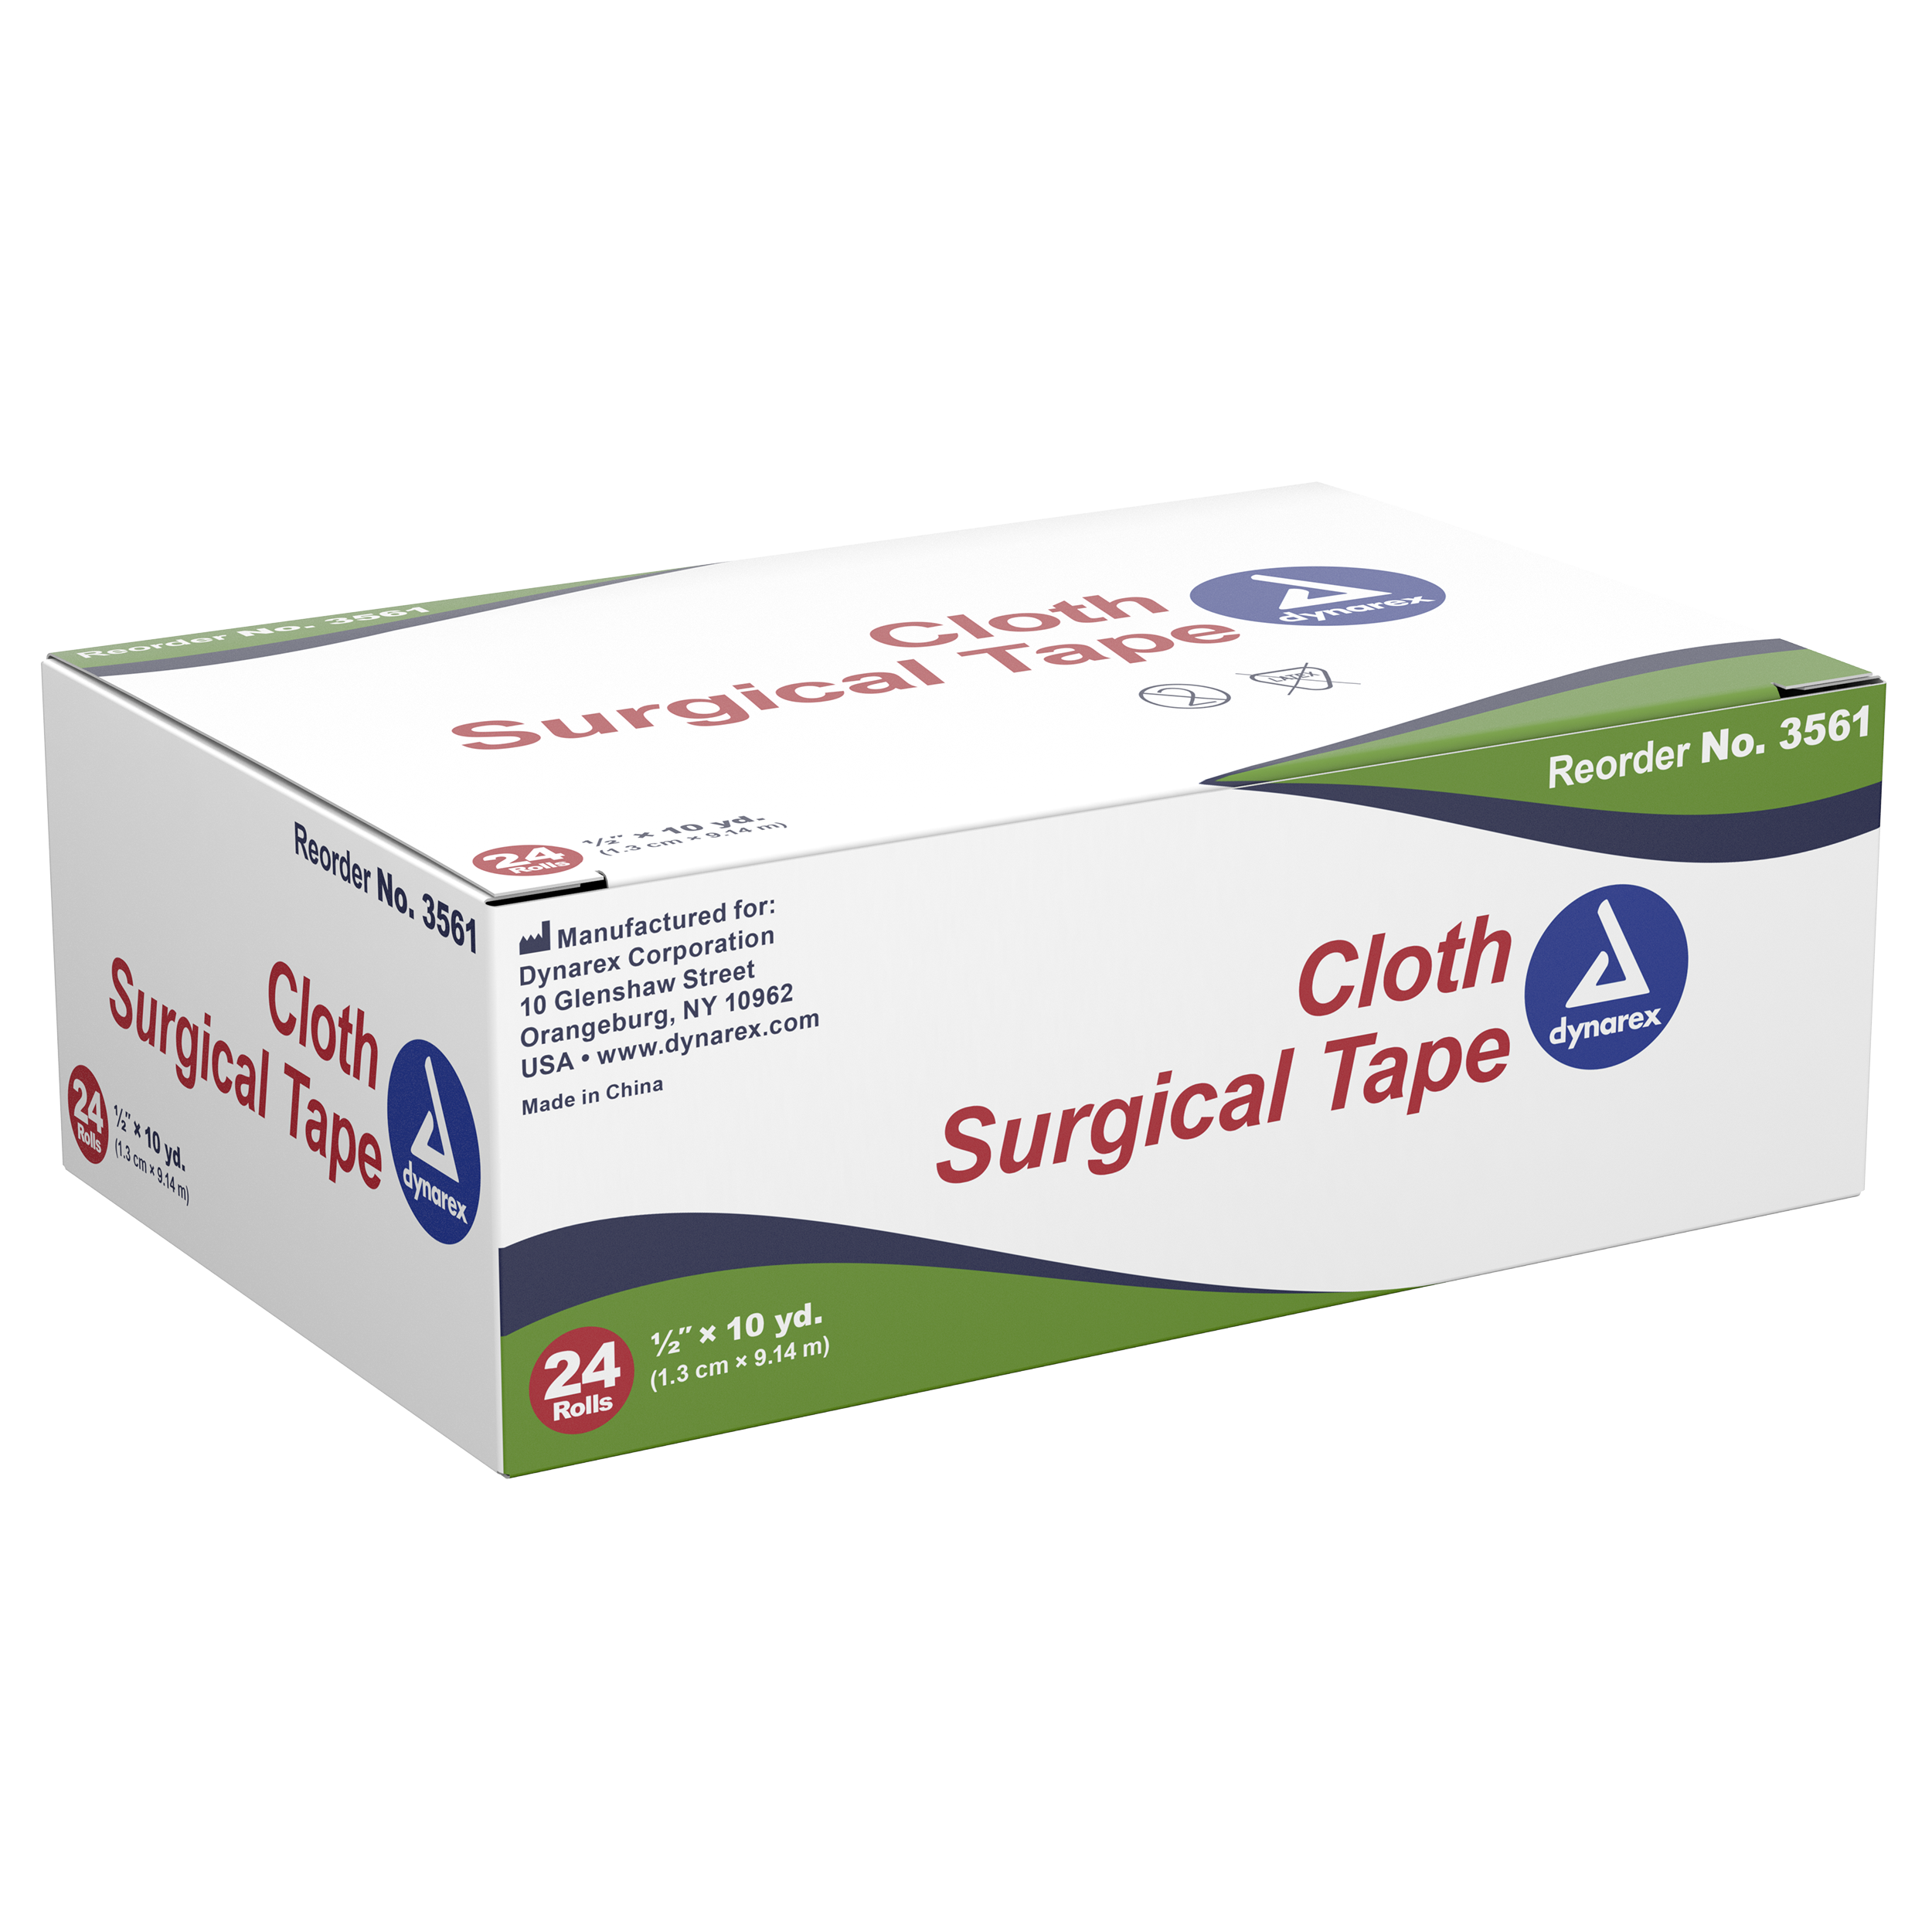 Cloth Surgical Tape - 1/2